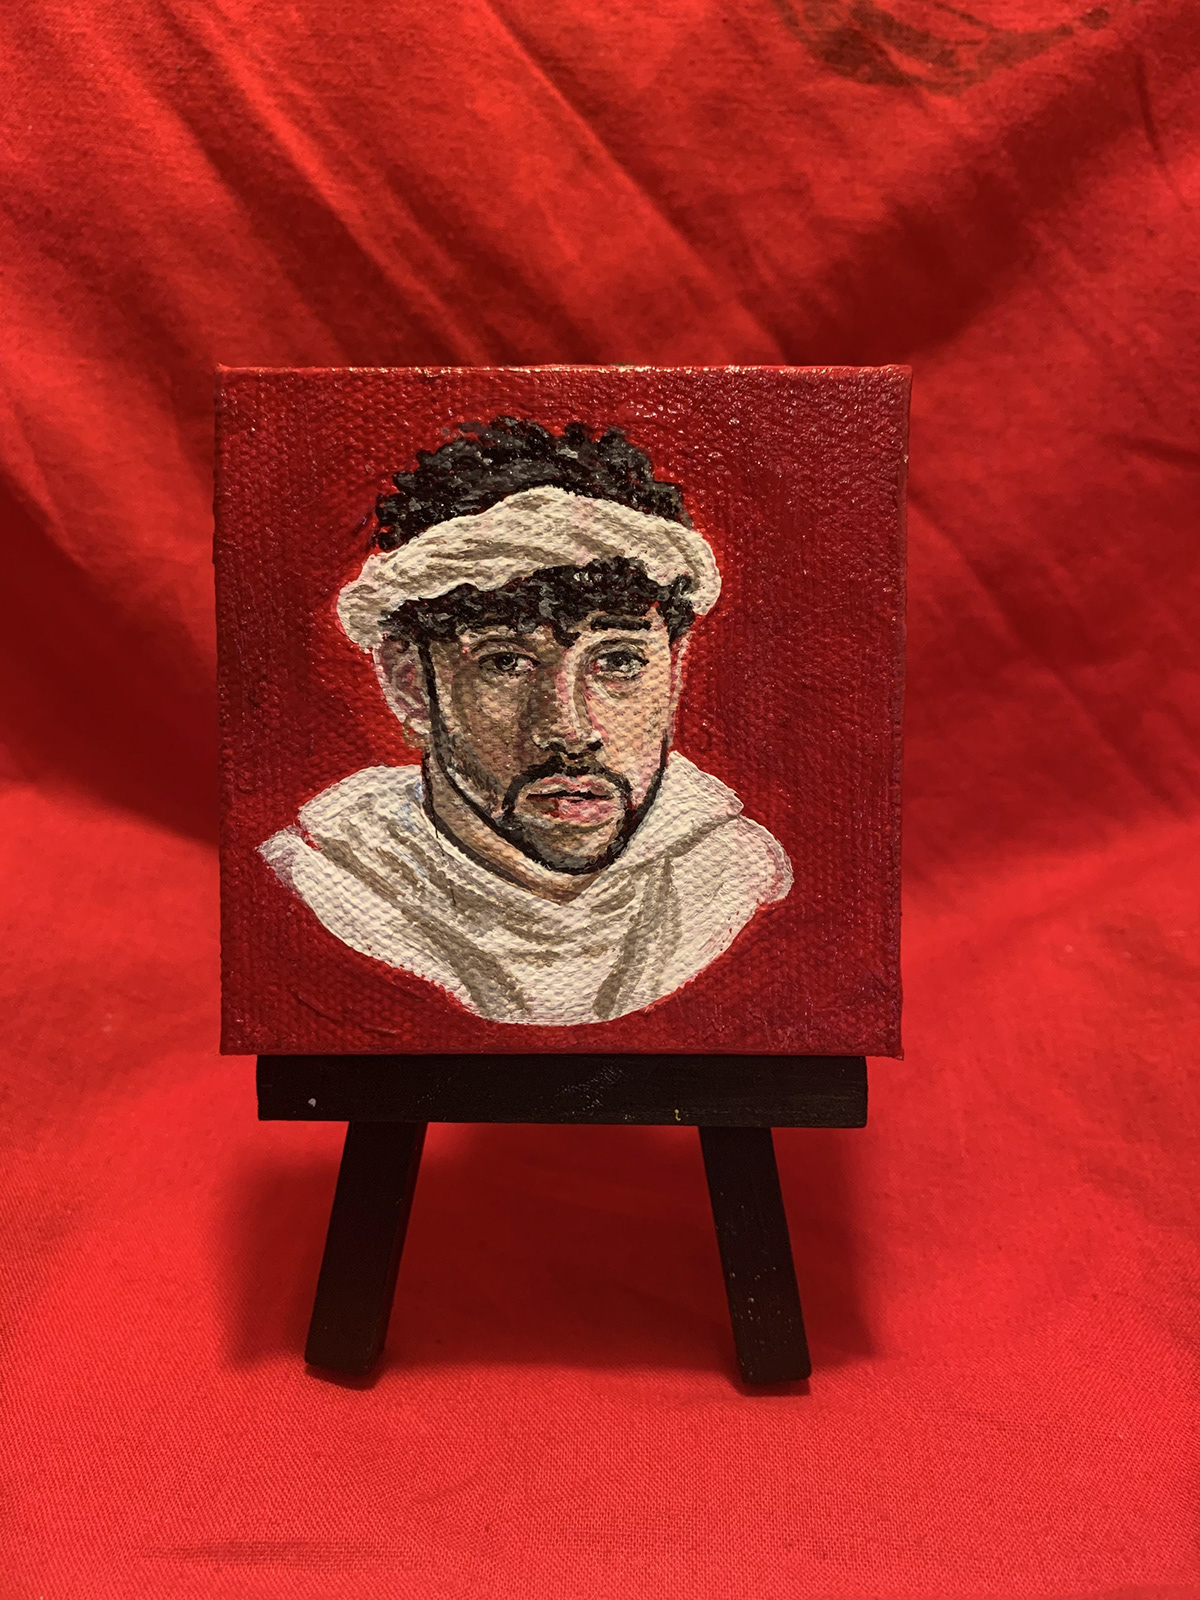 badbunny   Portraiture Realism cantinflas mexicanart tinypaintings